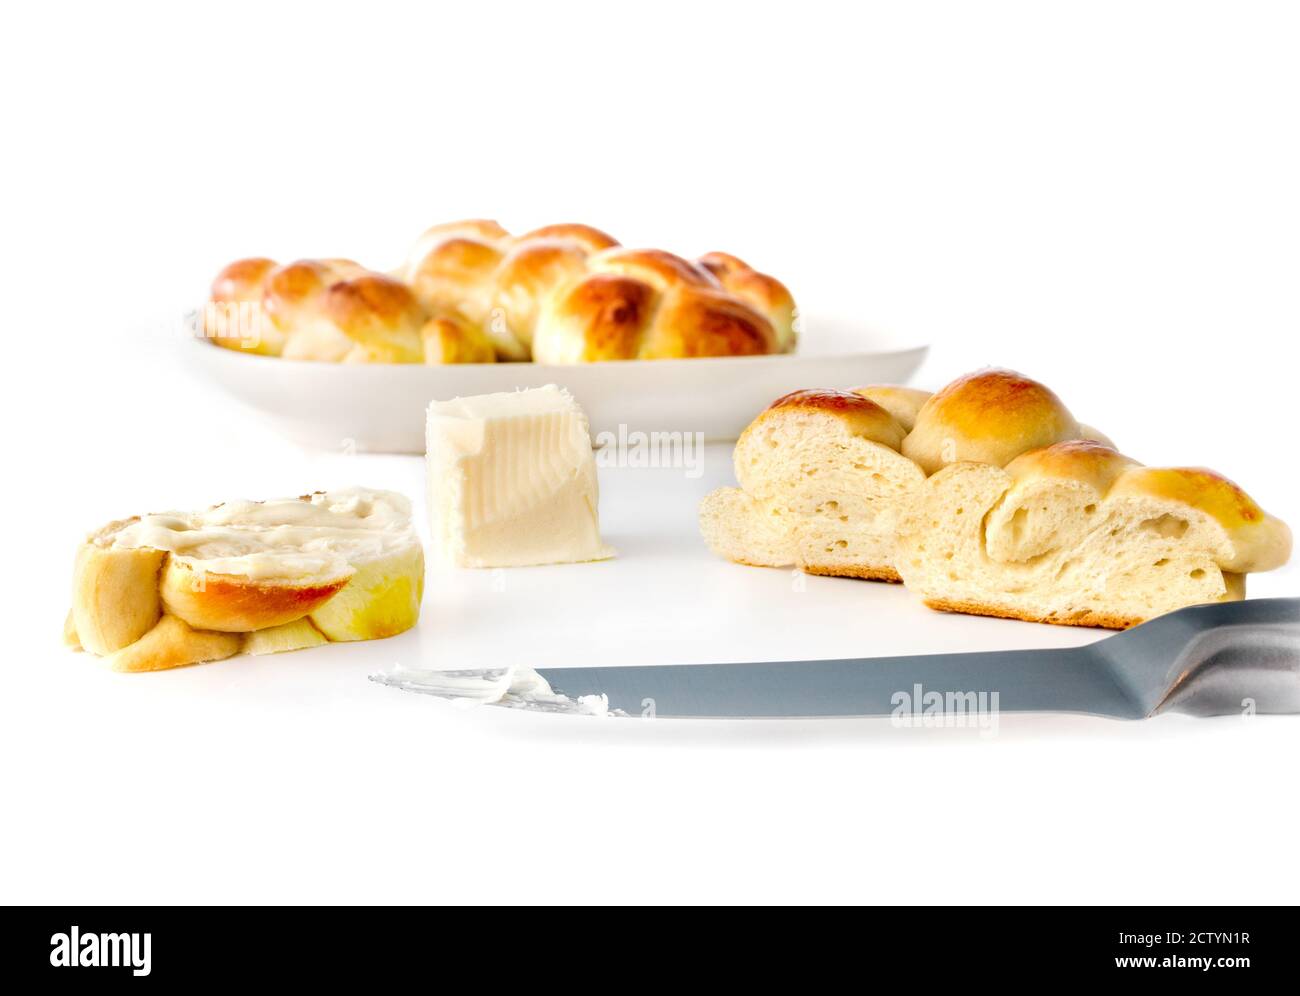 Multiple small braided buns, whole and sliced, with butter and knife. Concept for traditional breakfast table. Authentic Swiss butter bread recipe. Stock Photo